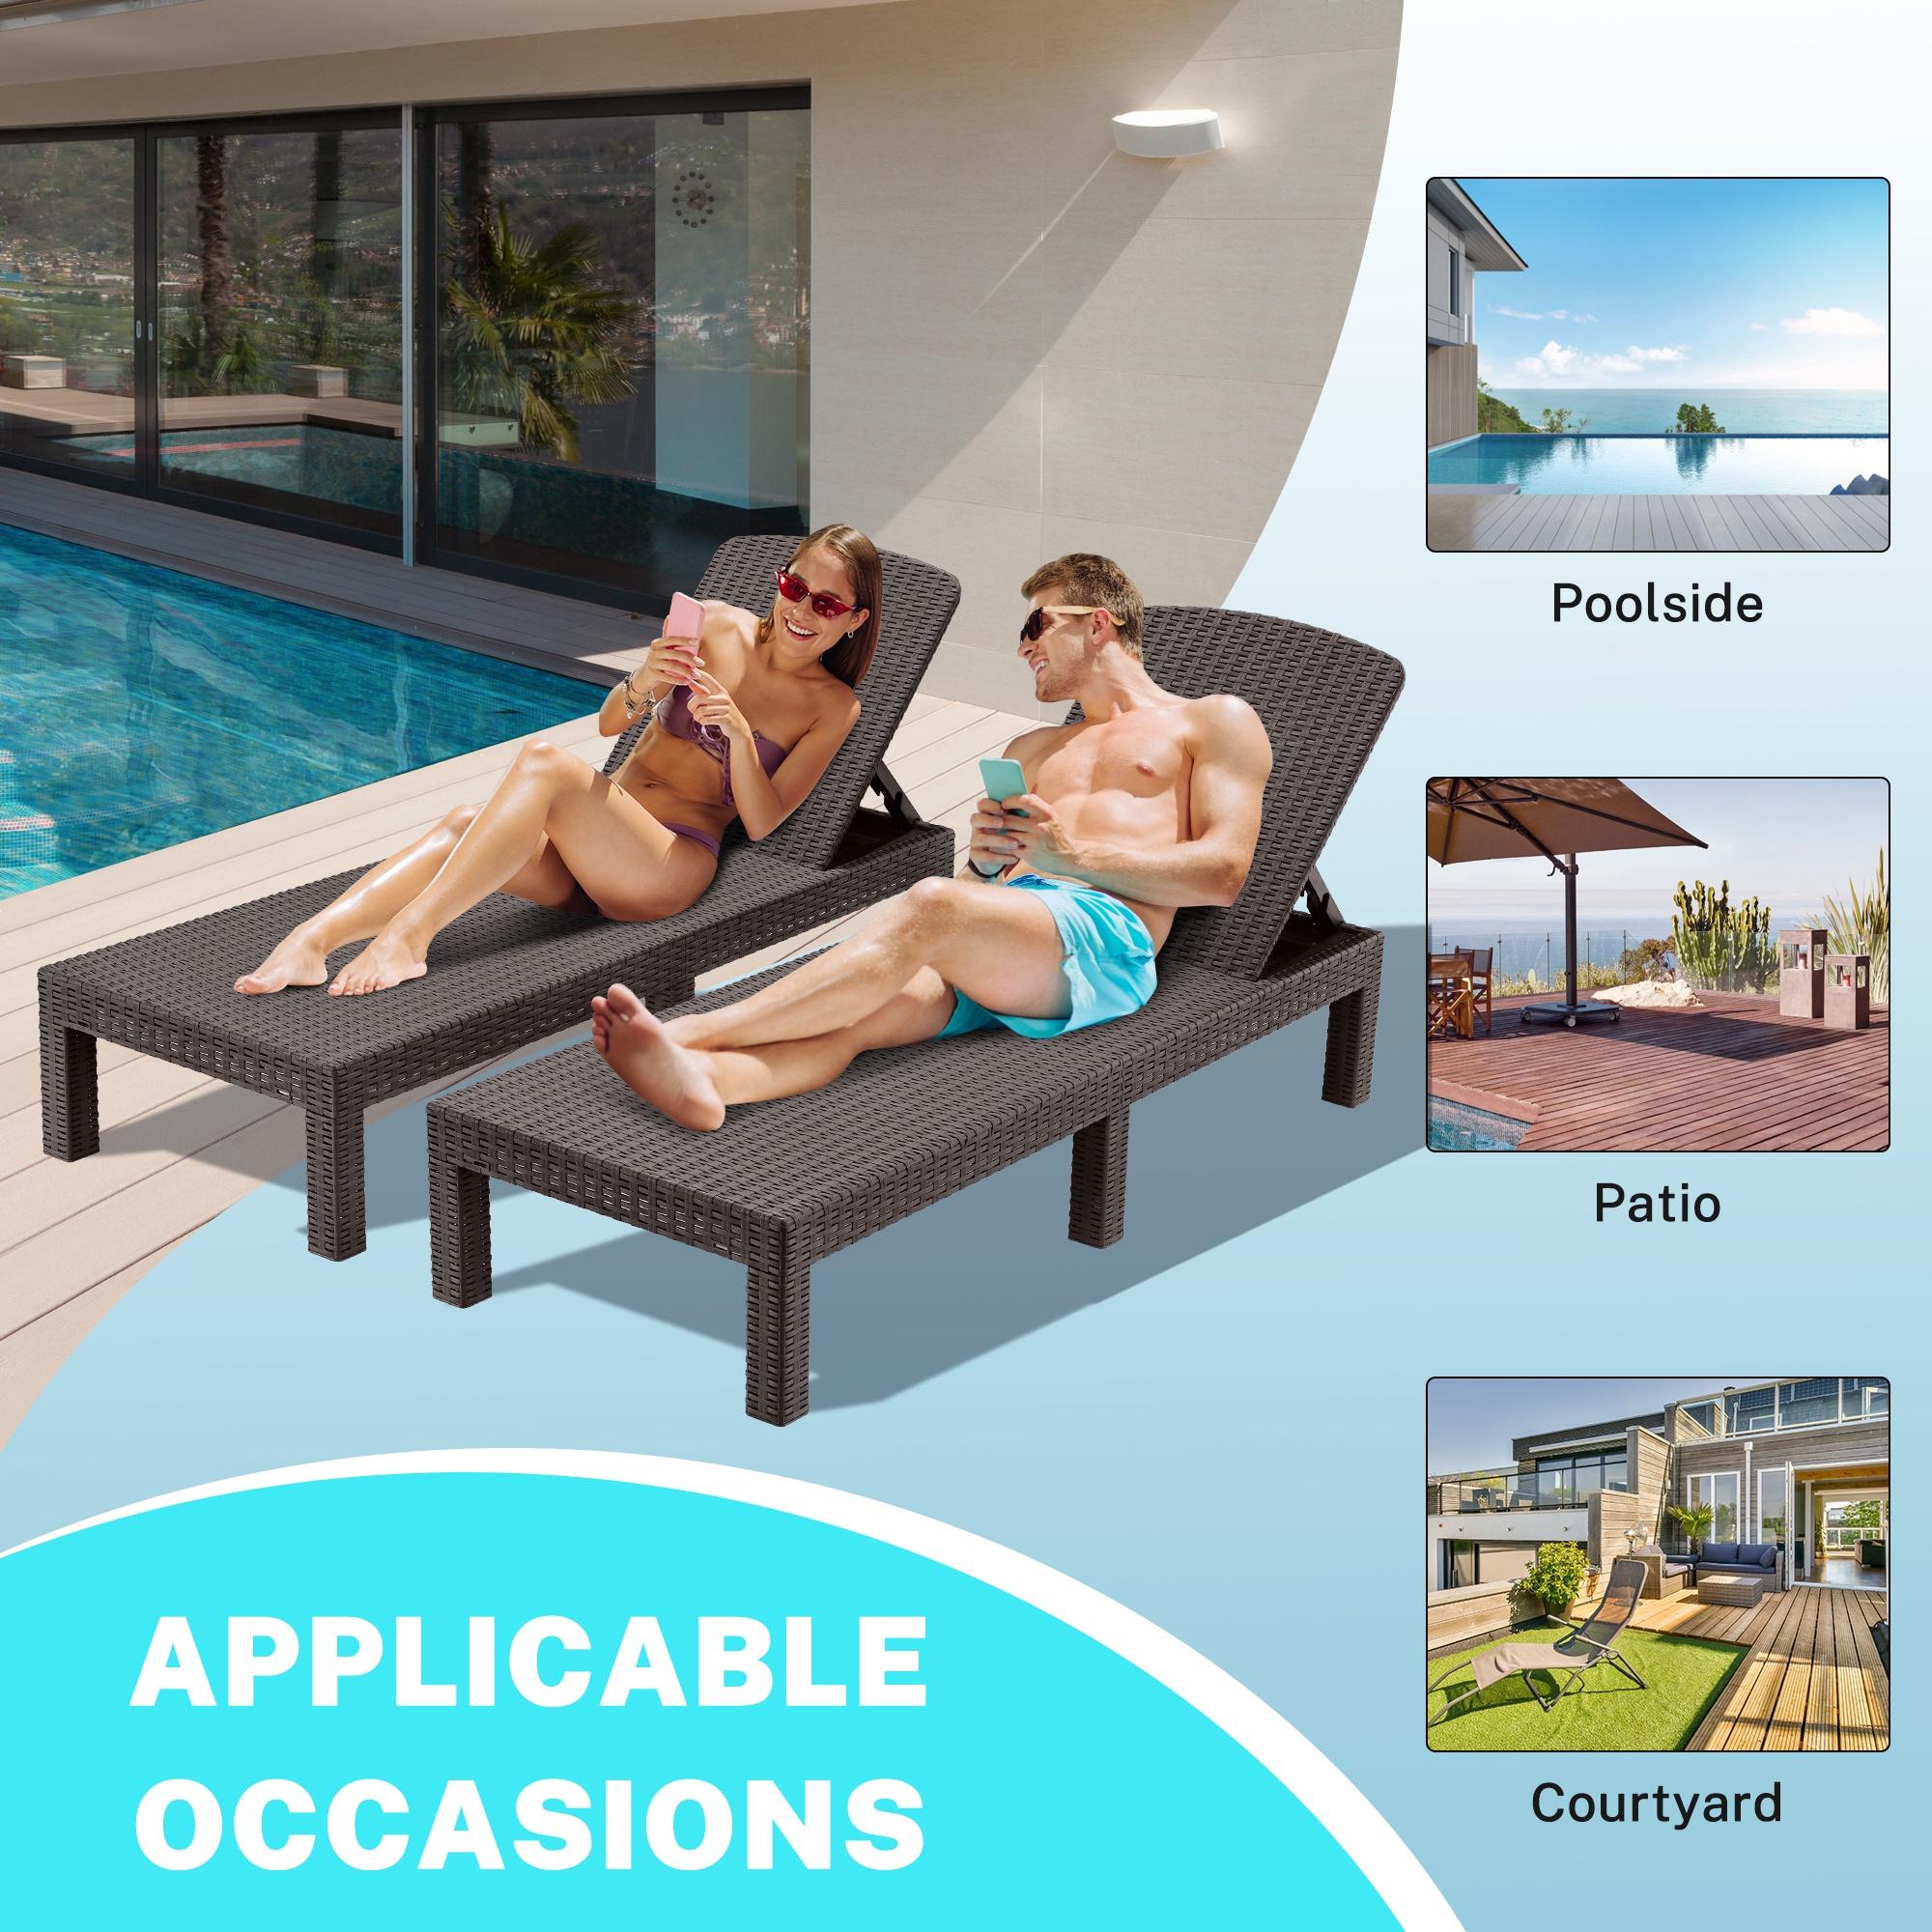 SYNGAR Patio Chaise Lounge Chairs Set of 2, Adjustable Chaise for Outside, PP Resin Reclining Lounge Chairs, Outdoor Sun Loungers for Poolside Deck Garden, Espresso - image 4 of 10